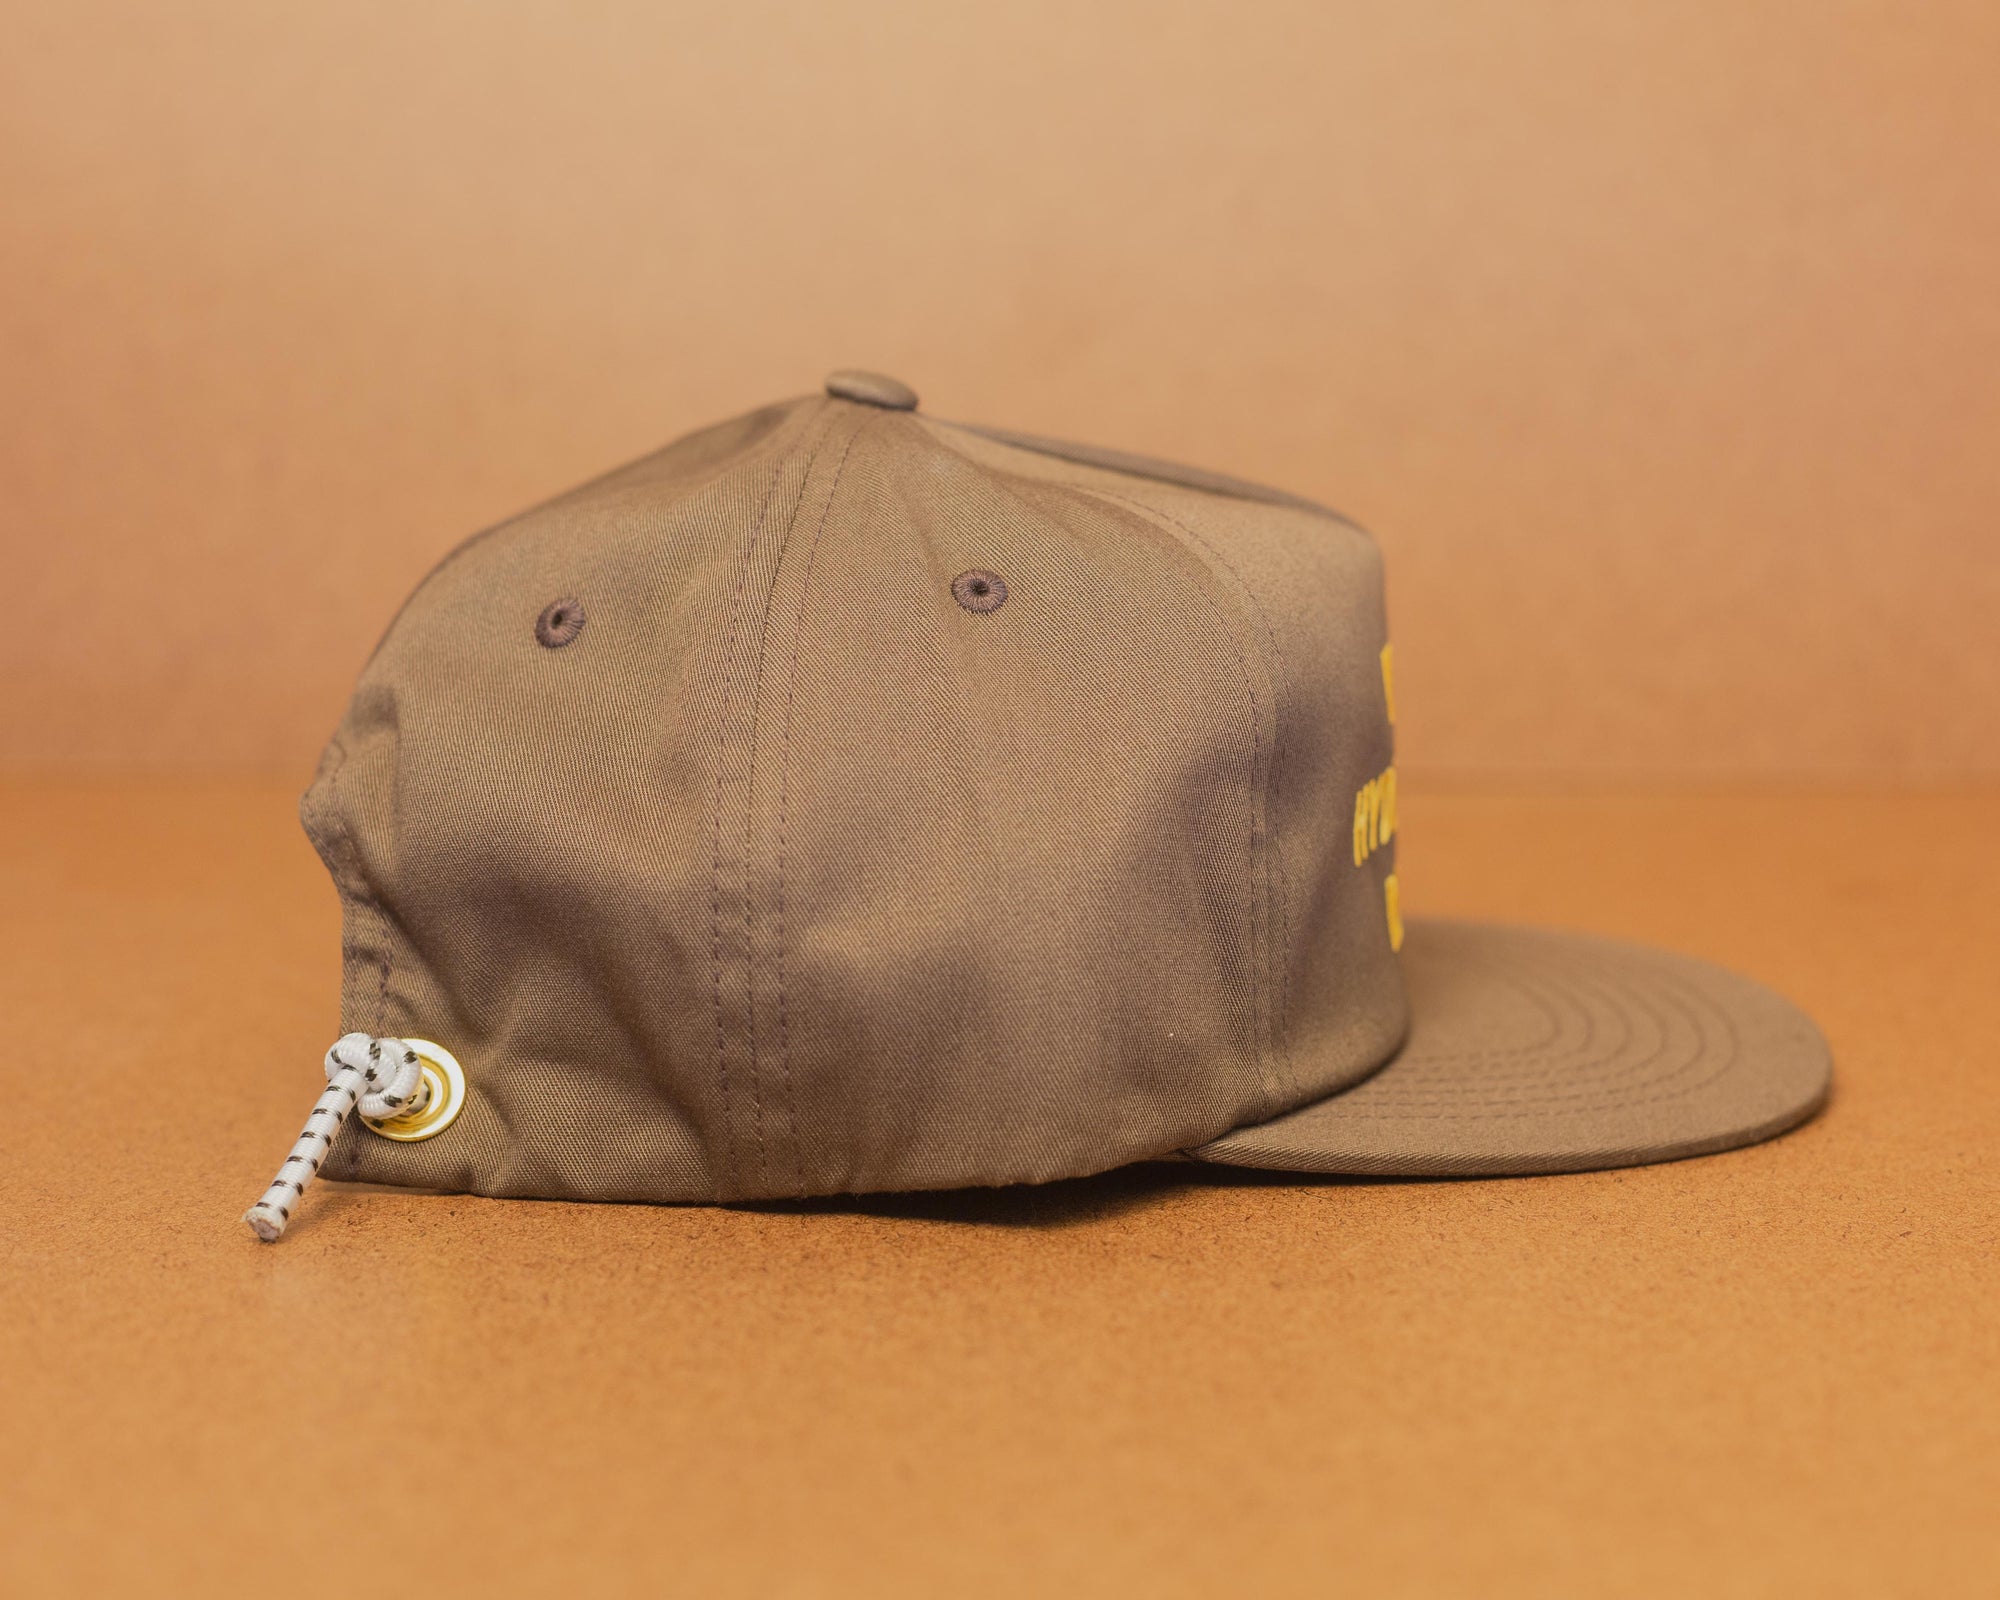 Western Hydrodynamic Research- Canvas Promotional Hat (Brown) side view